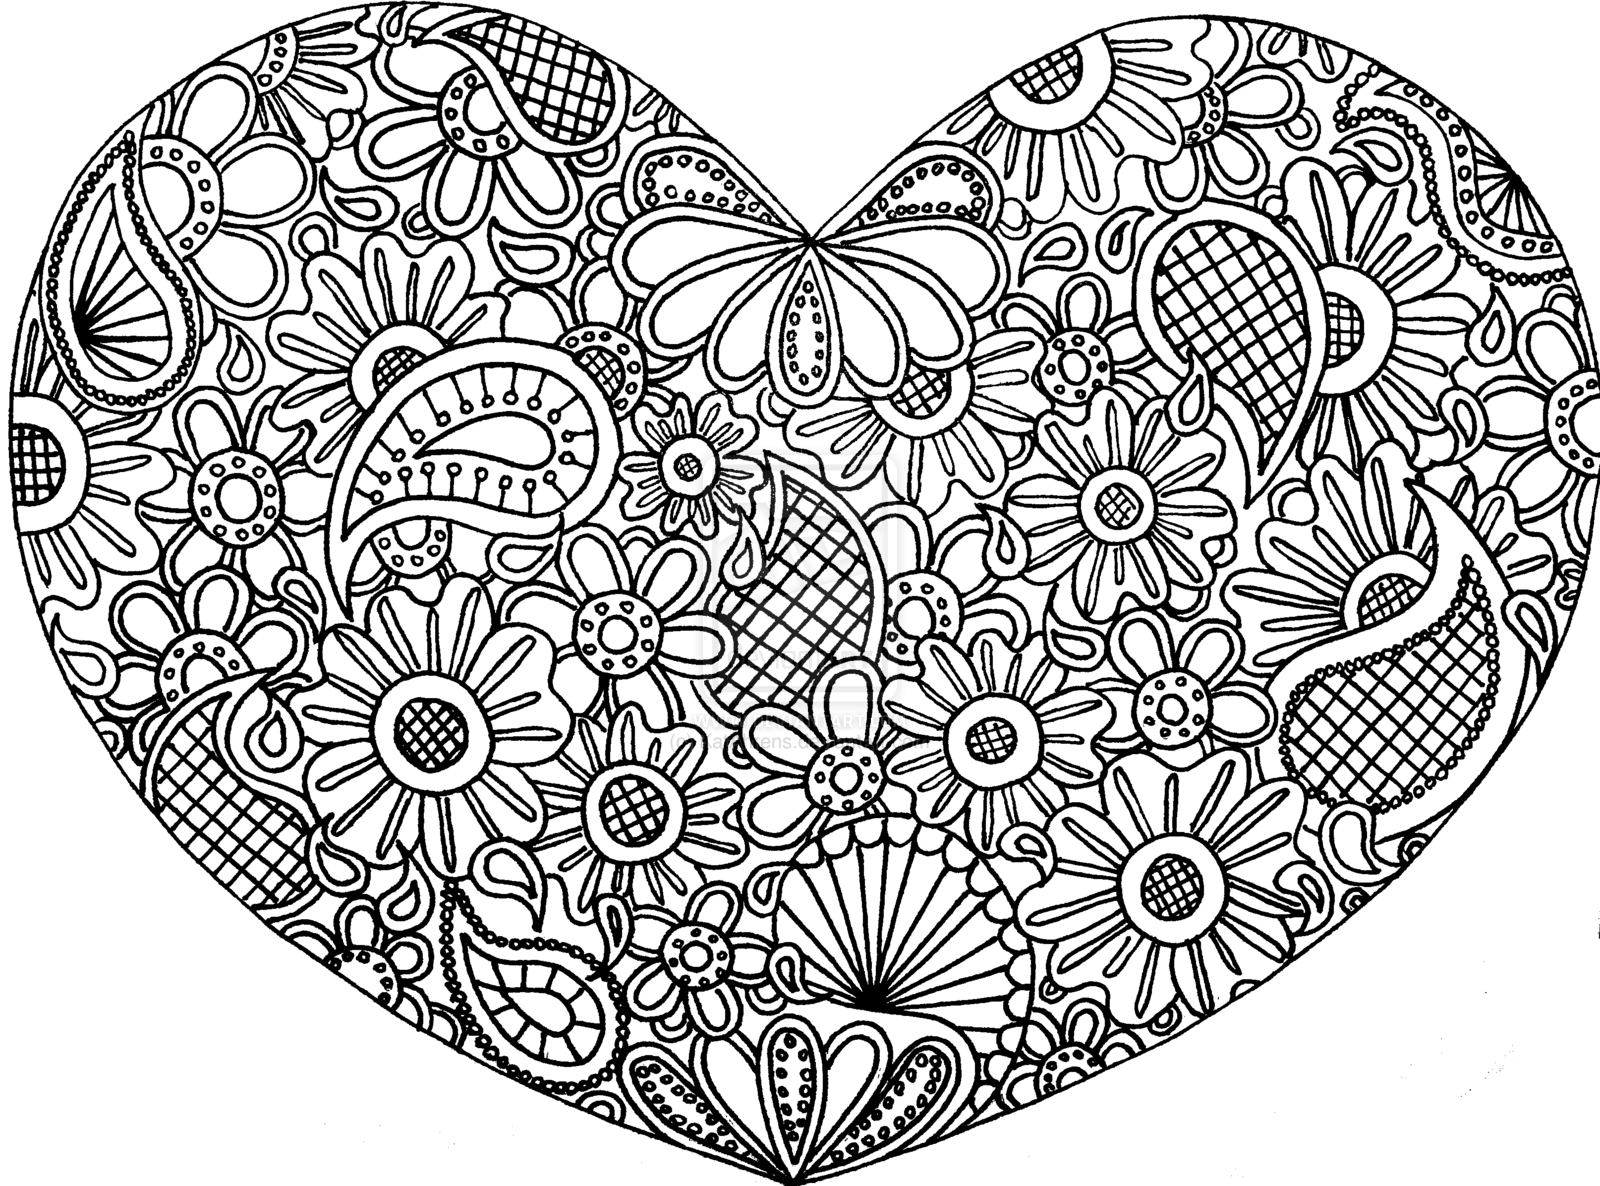 15 Pics of Zentangle Coloring Pages Free Printable - Zentangle ...